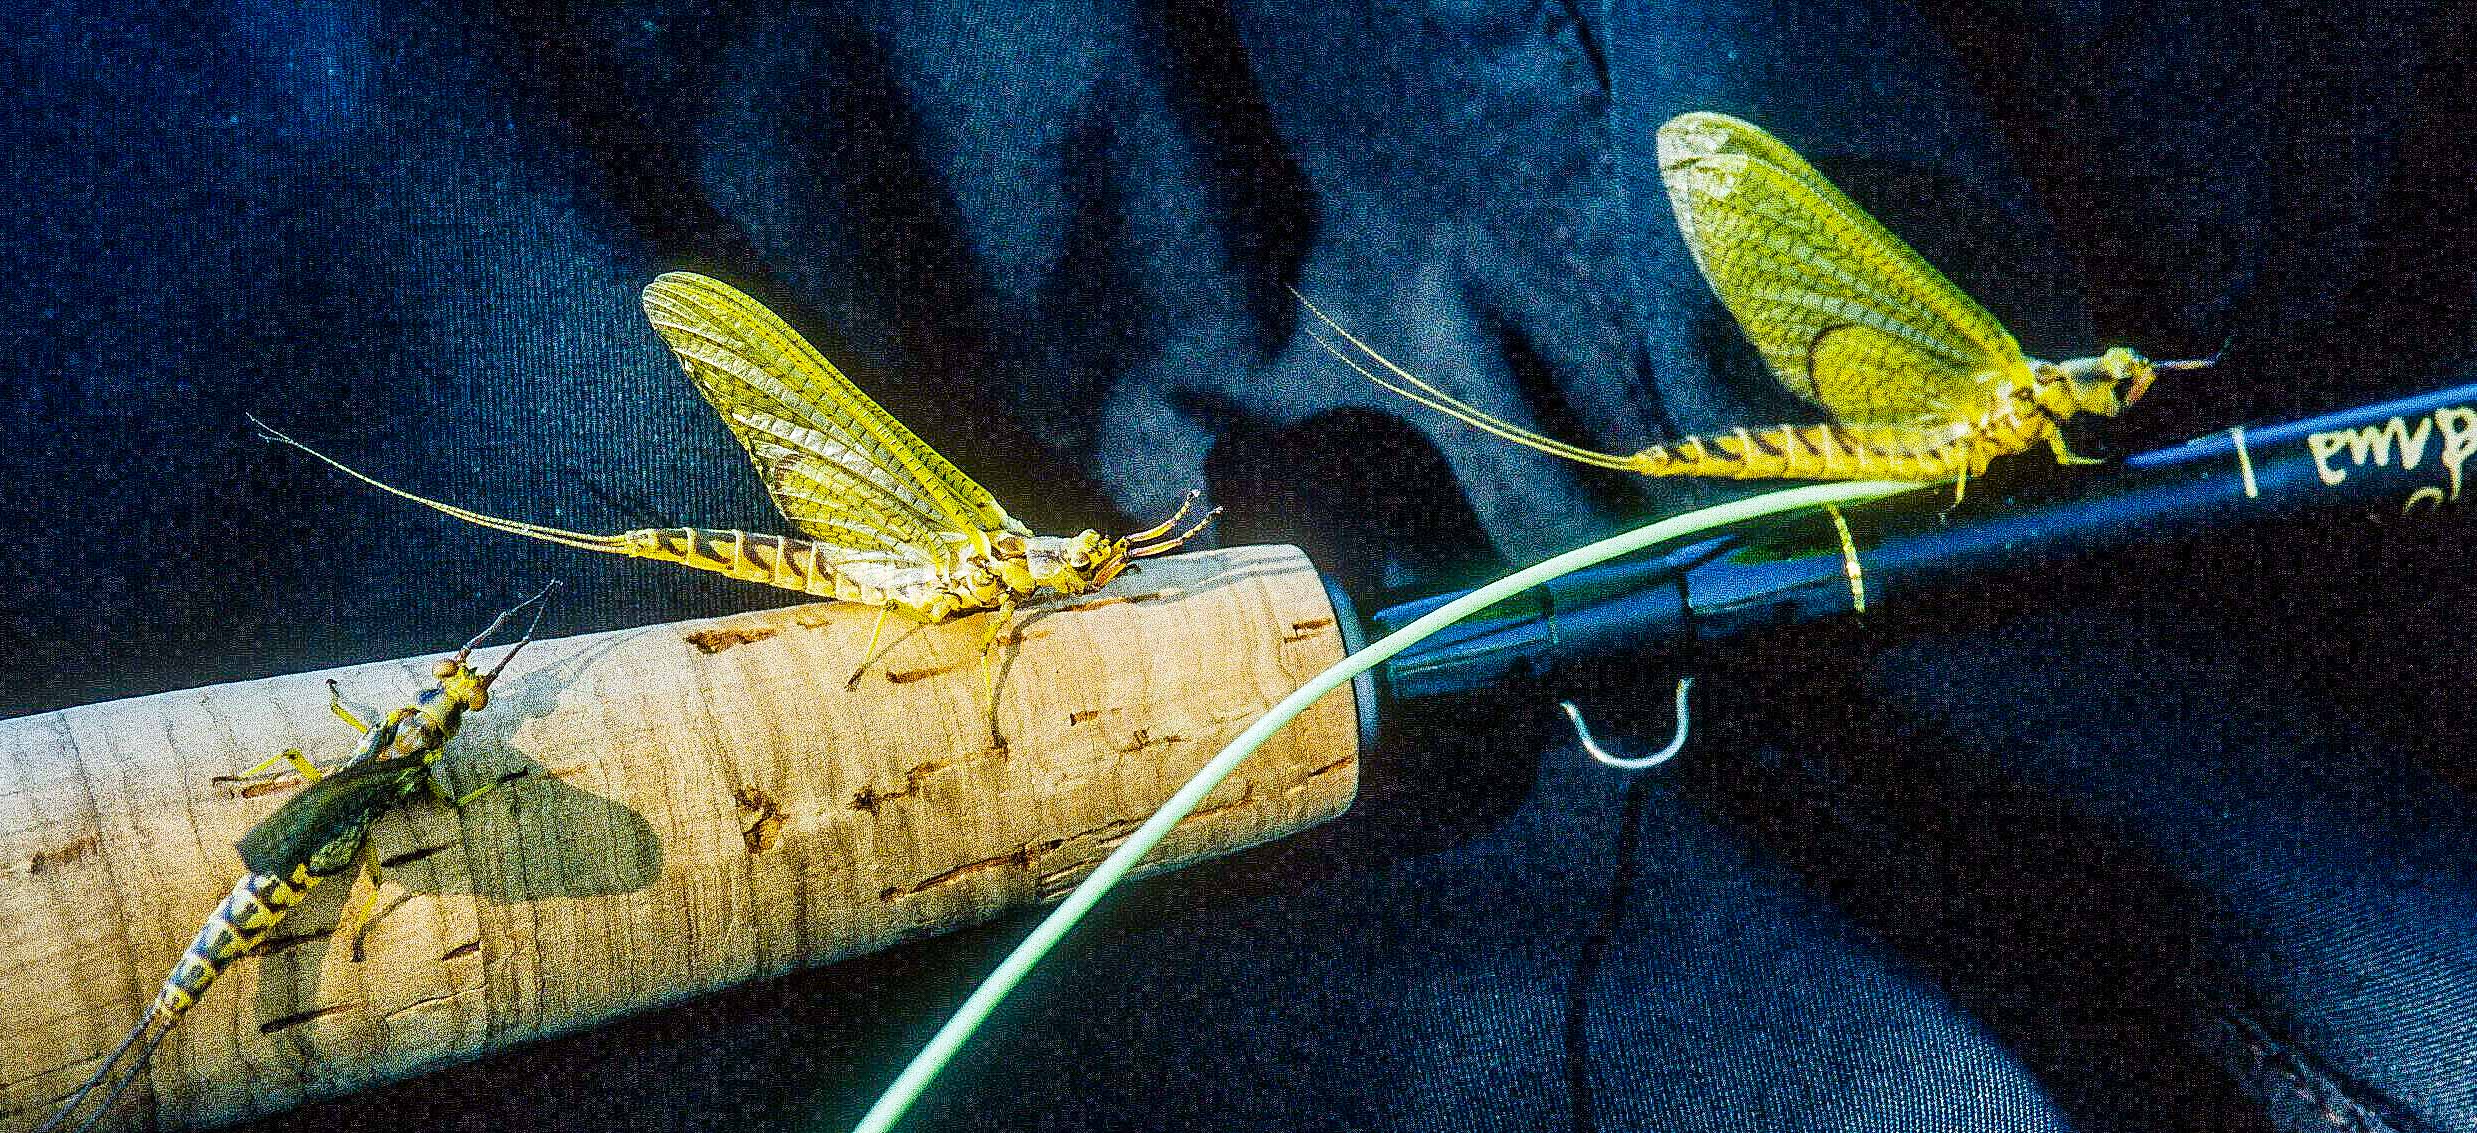 https://www.skip-morris-fly-tying.com/images/FirstTuesdayTips6ExperiencetheHexHatchatLeastOnceorTwice.jpg